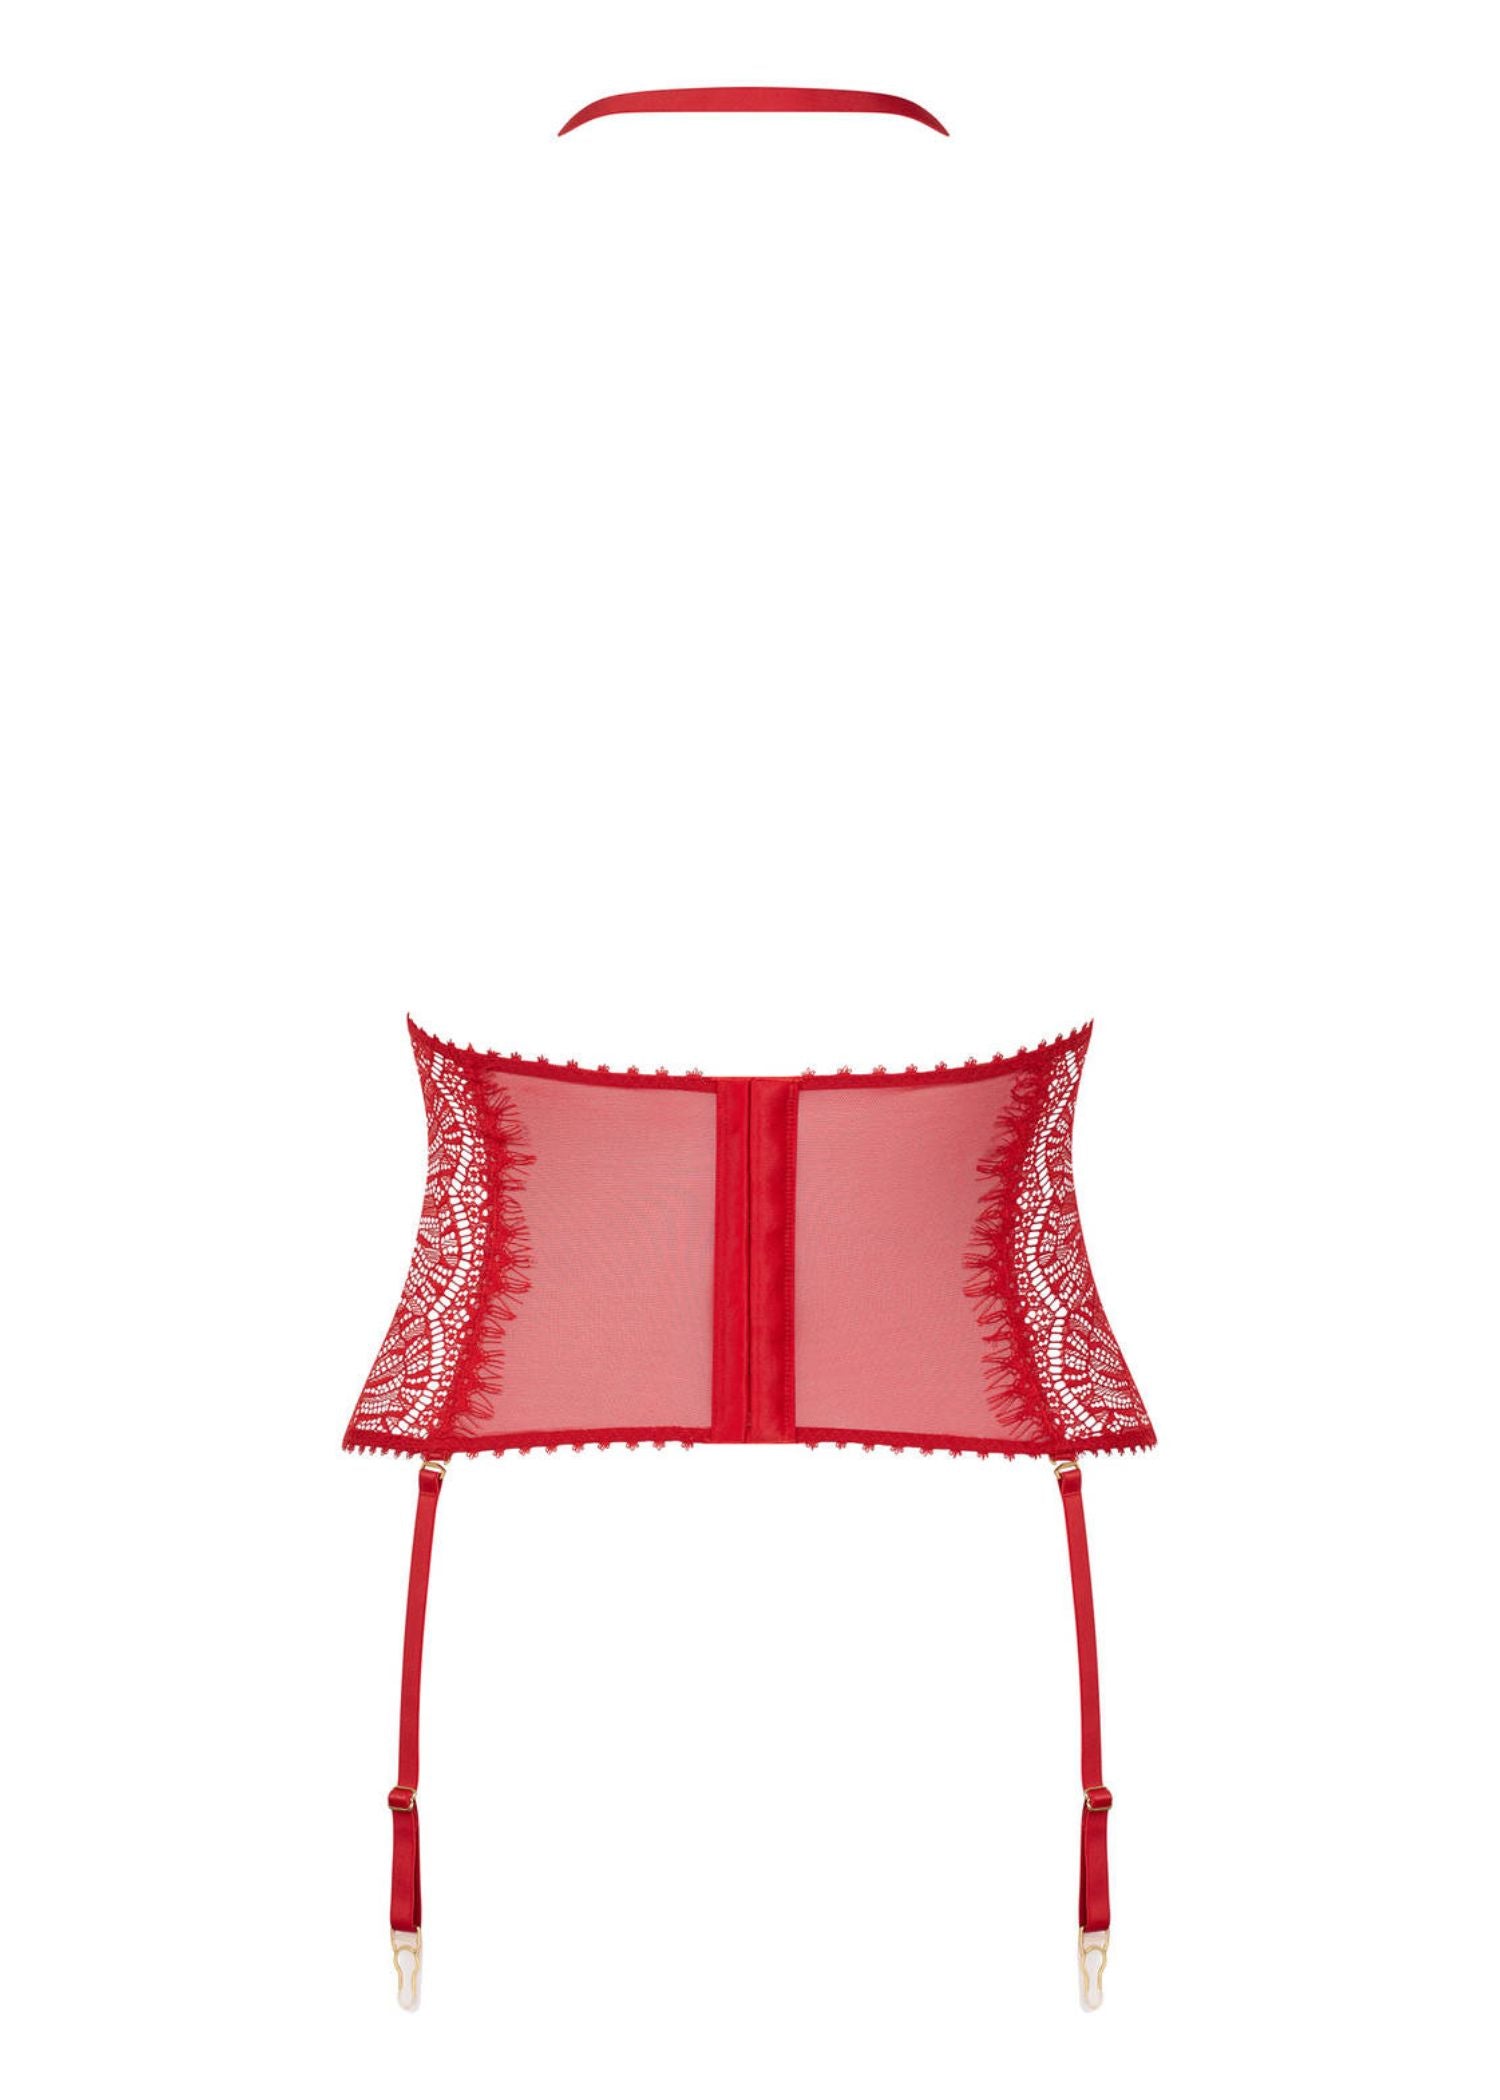 Maison Close Accroche Coeur Waist Cincher with Suspenders (Red) - Suspender Harness | Avec Amour Sexy Lingerie